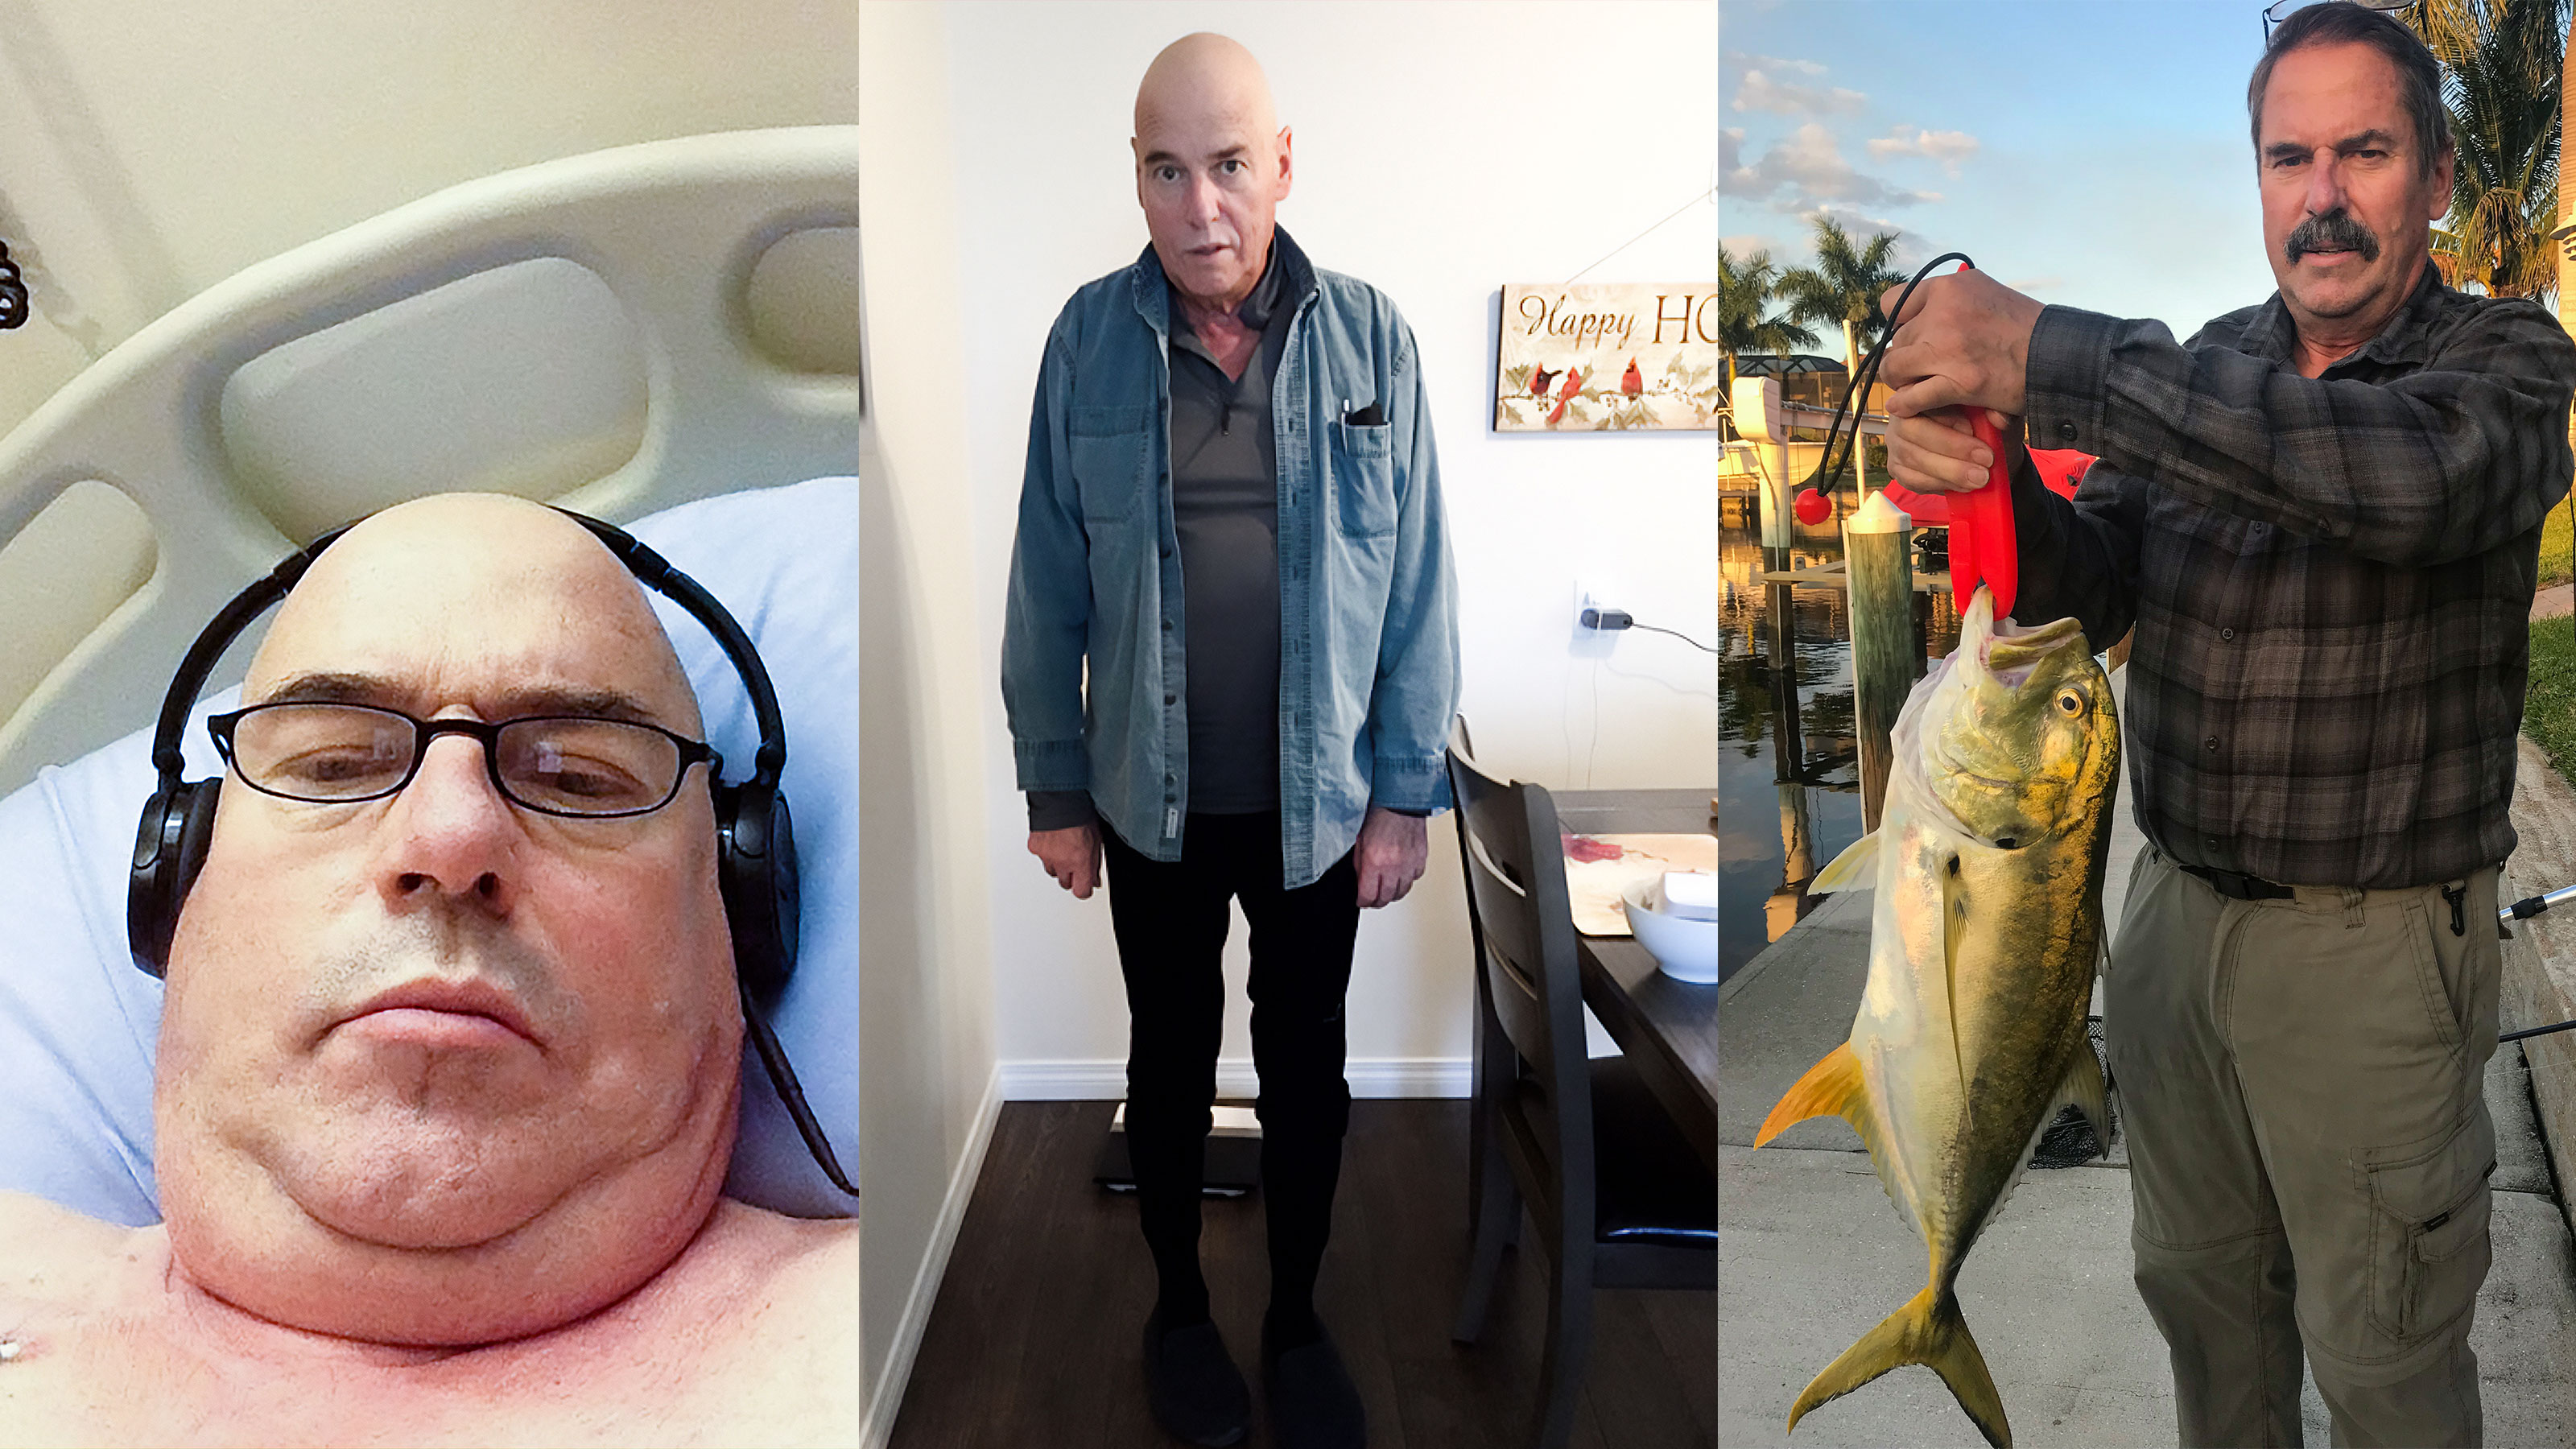 Stem cell transplant patient Paul Guenard just before receiving a stem cell transplant six years ago (left), after his transplant (centre), and in Florida recently